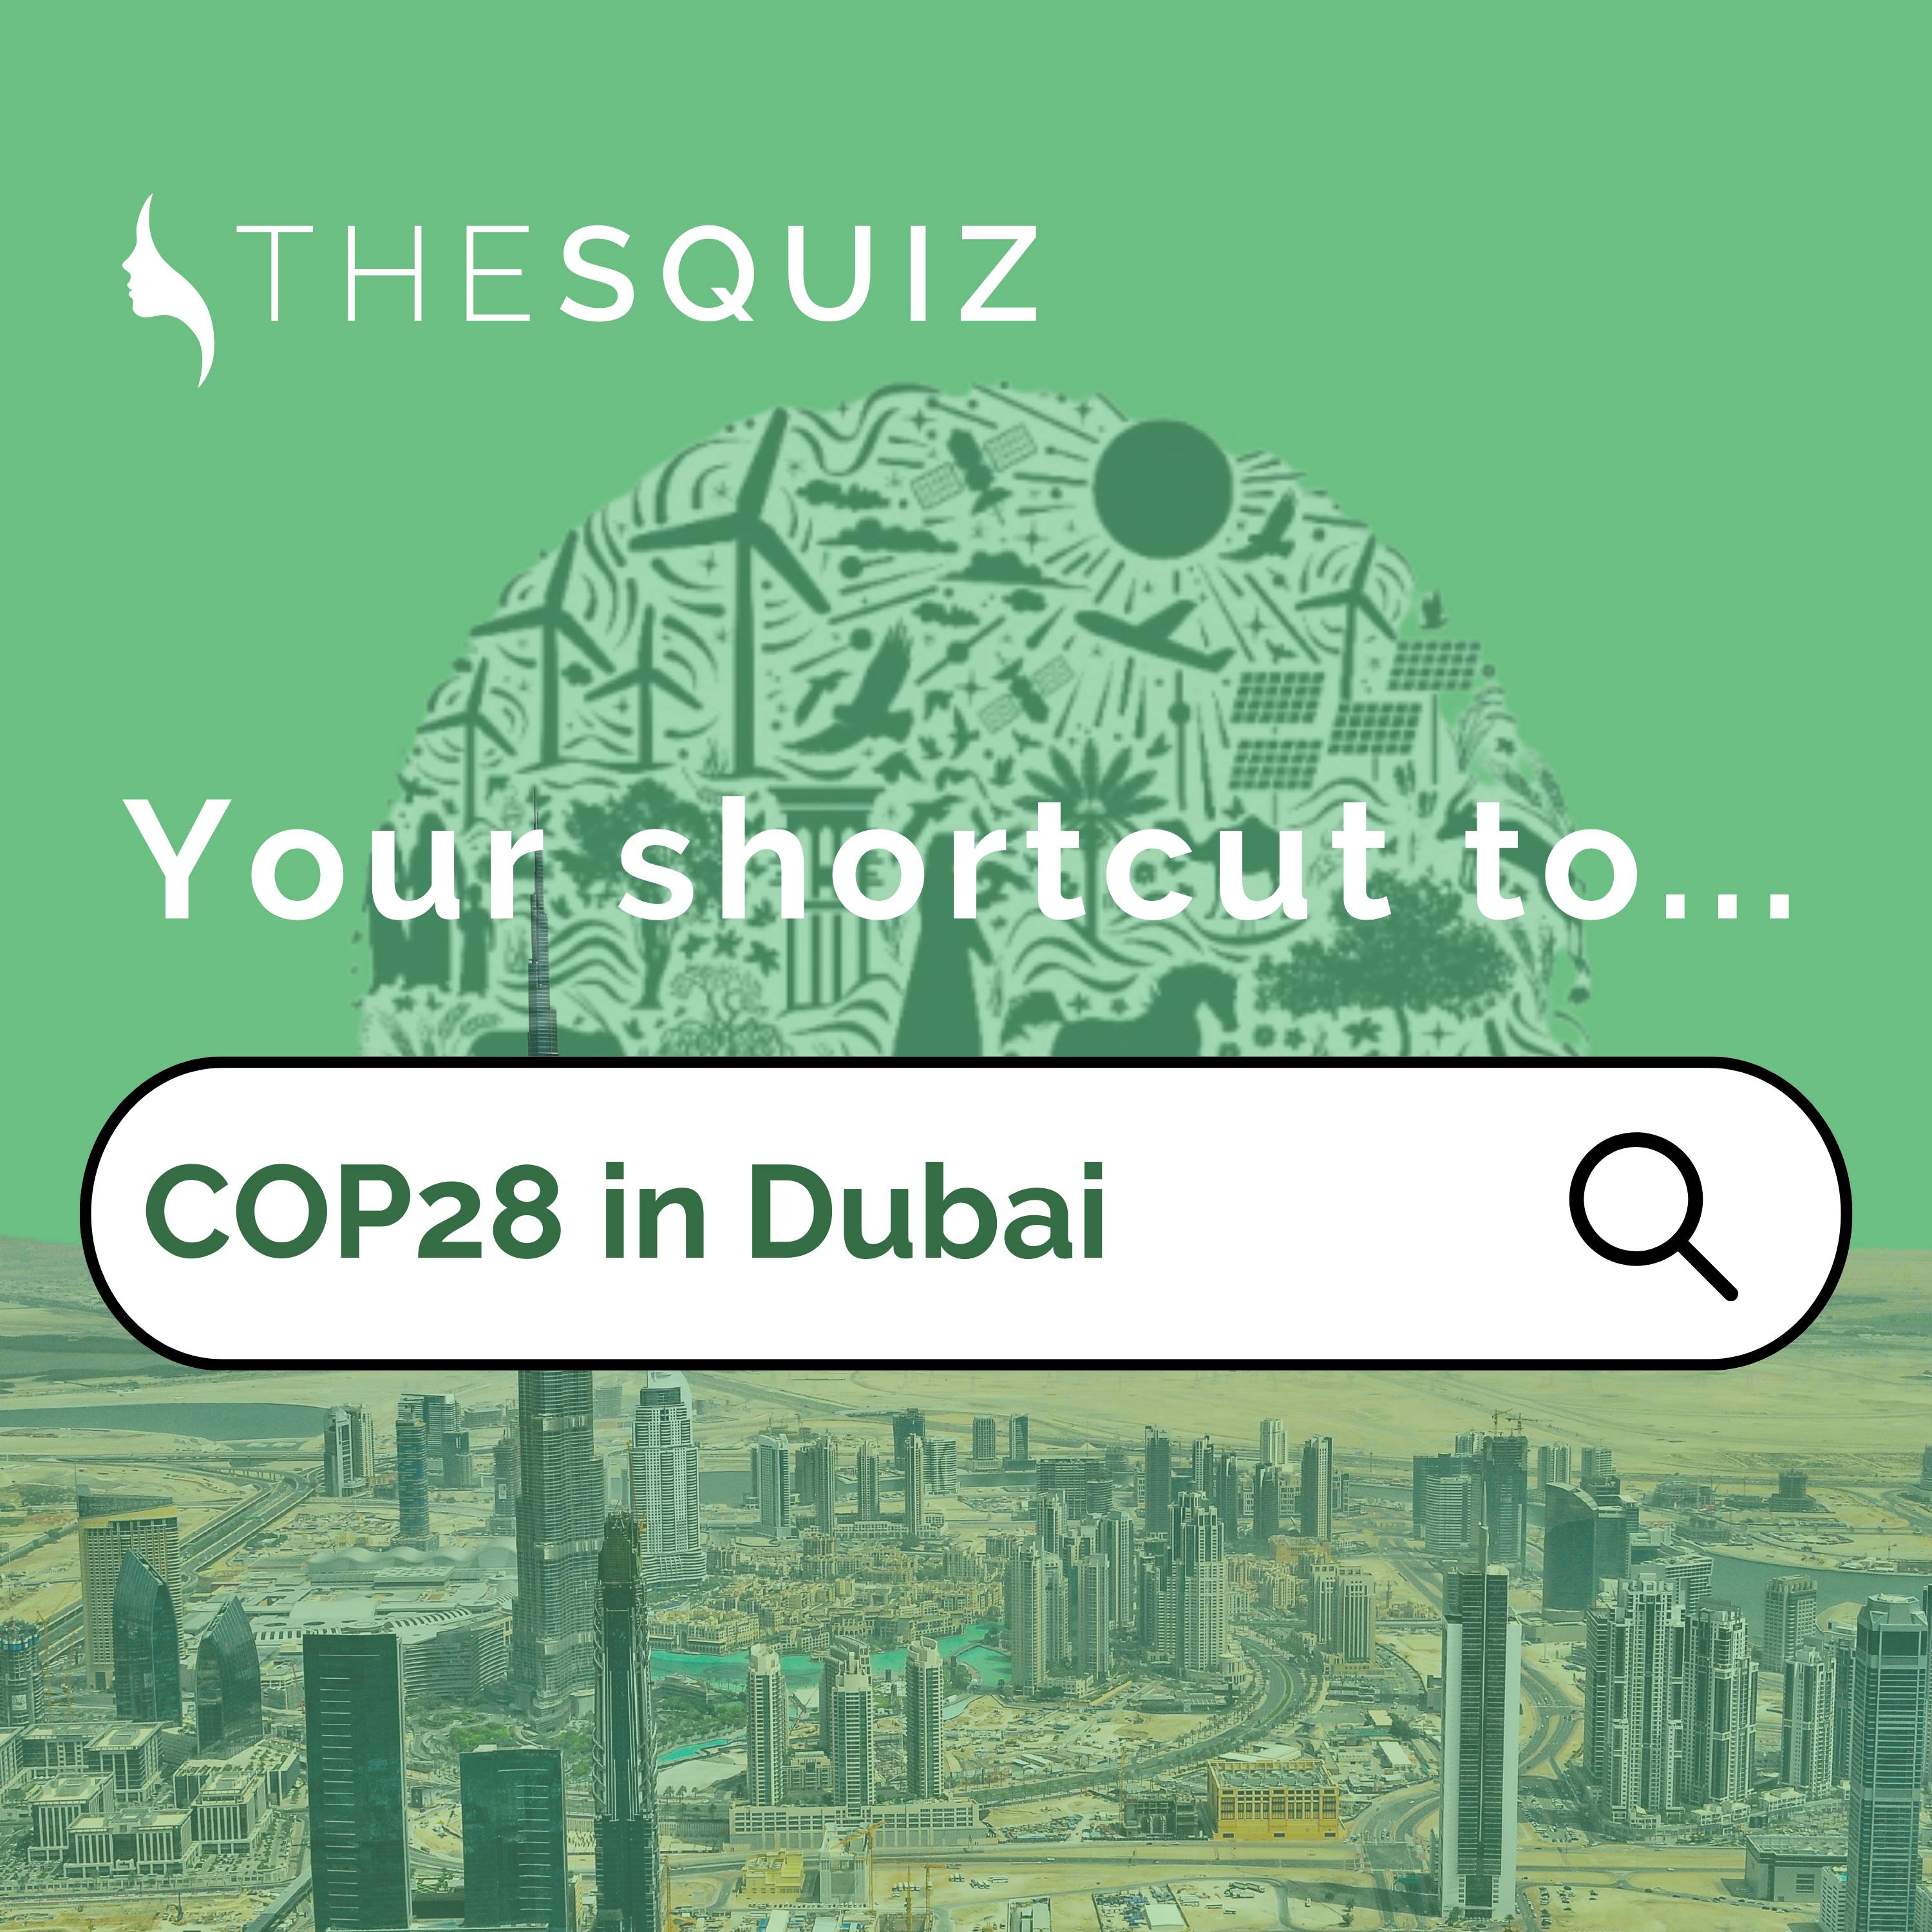 Your Shortcut to... what’s going down at COP28